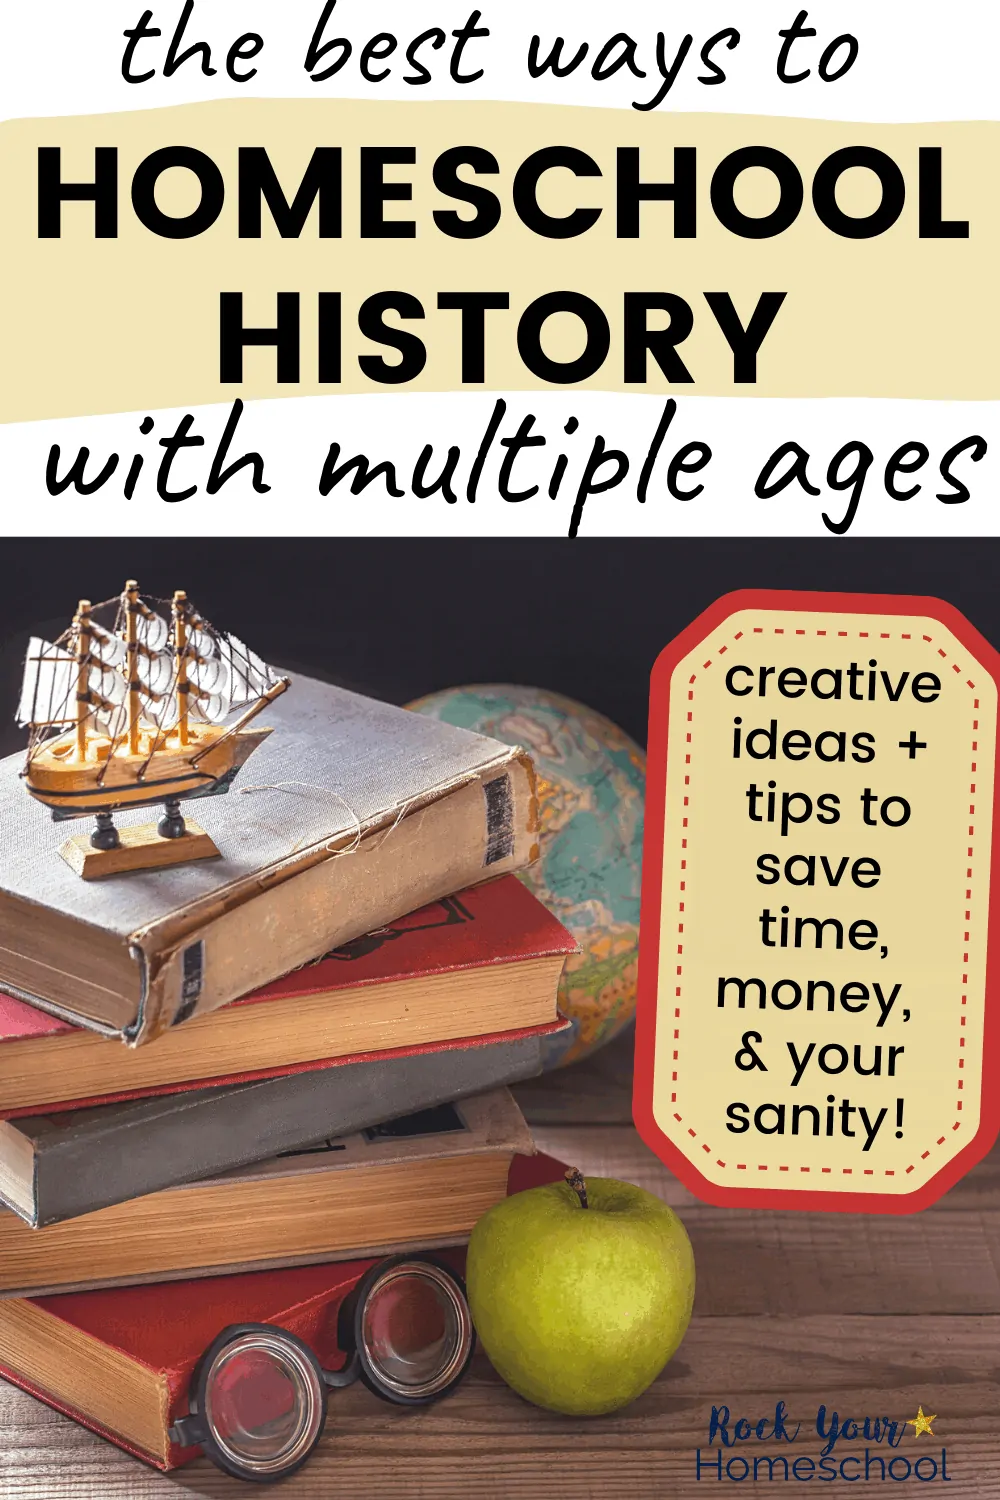 The Best Ways to Homeschool History with Multiple Ages